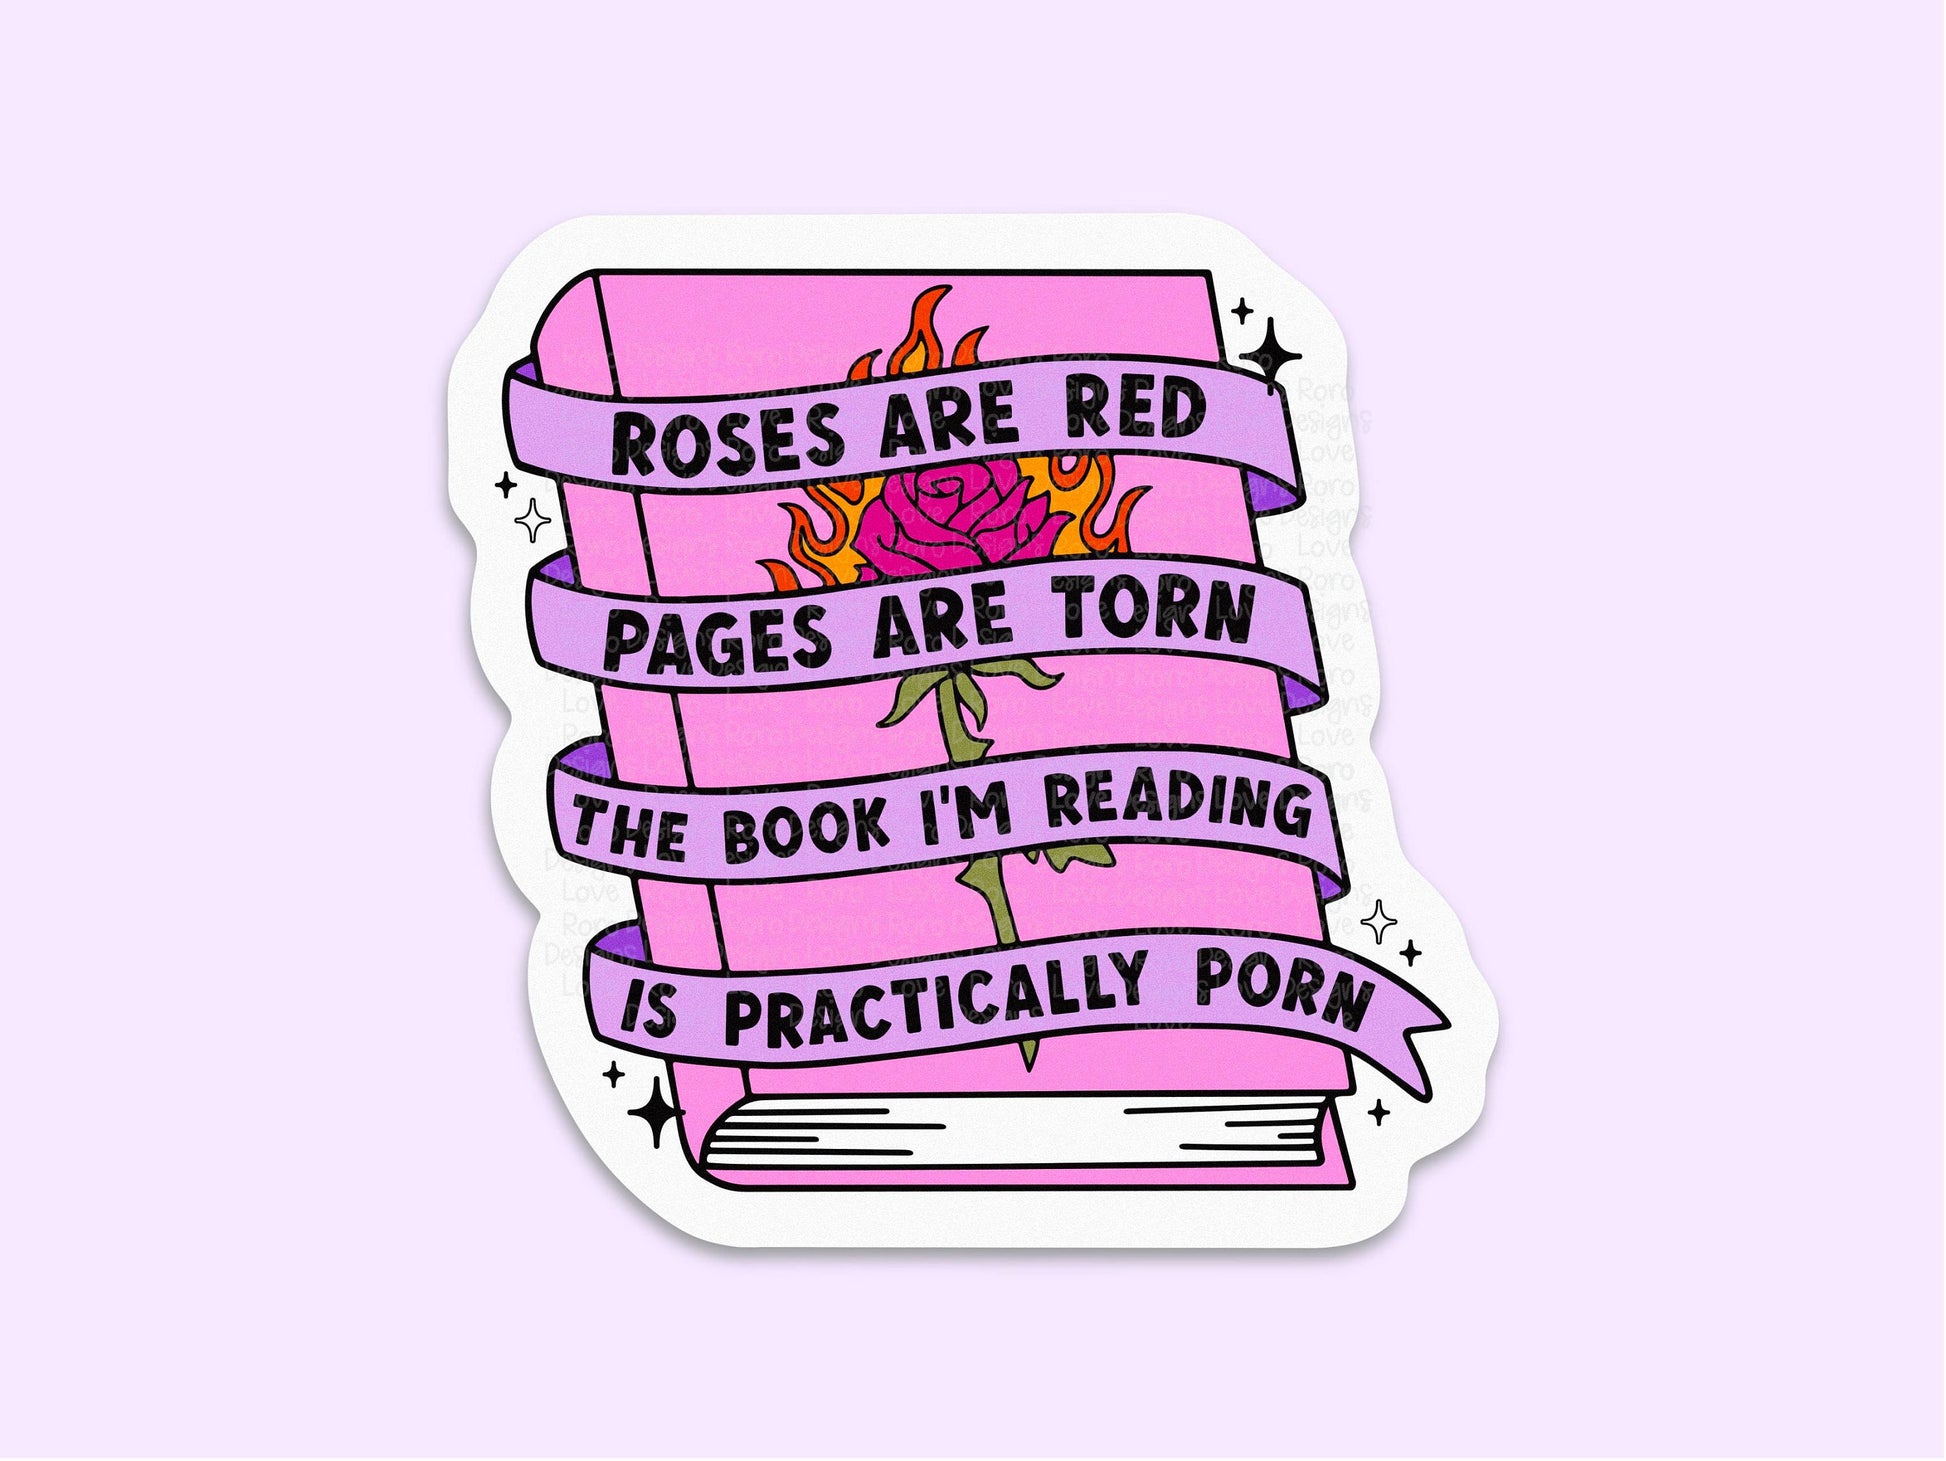 roses are red pages are worn smut stickers for Kindle, funny stickers for adults, spicy book stickers romance reader gifts for women, book